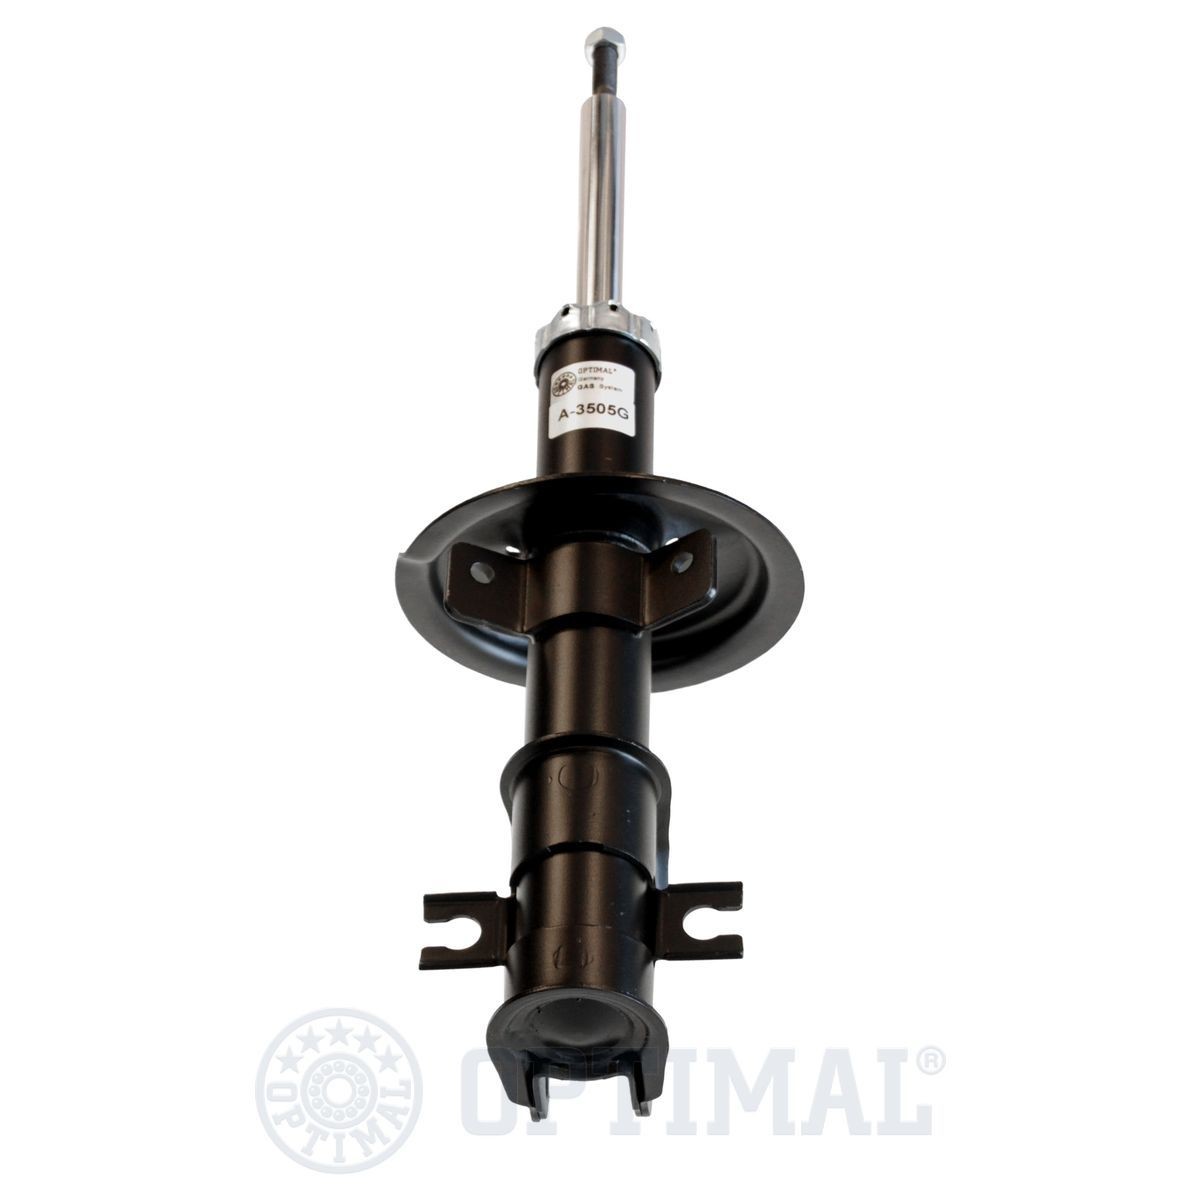 OPTIMAL A-3605G Shock absorber Front Axle, Gas Pressure, Twin-Tube, Suspension Strut, Top pin, Bottom Clamp, M14x1,5